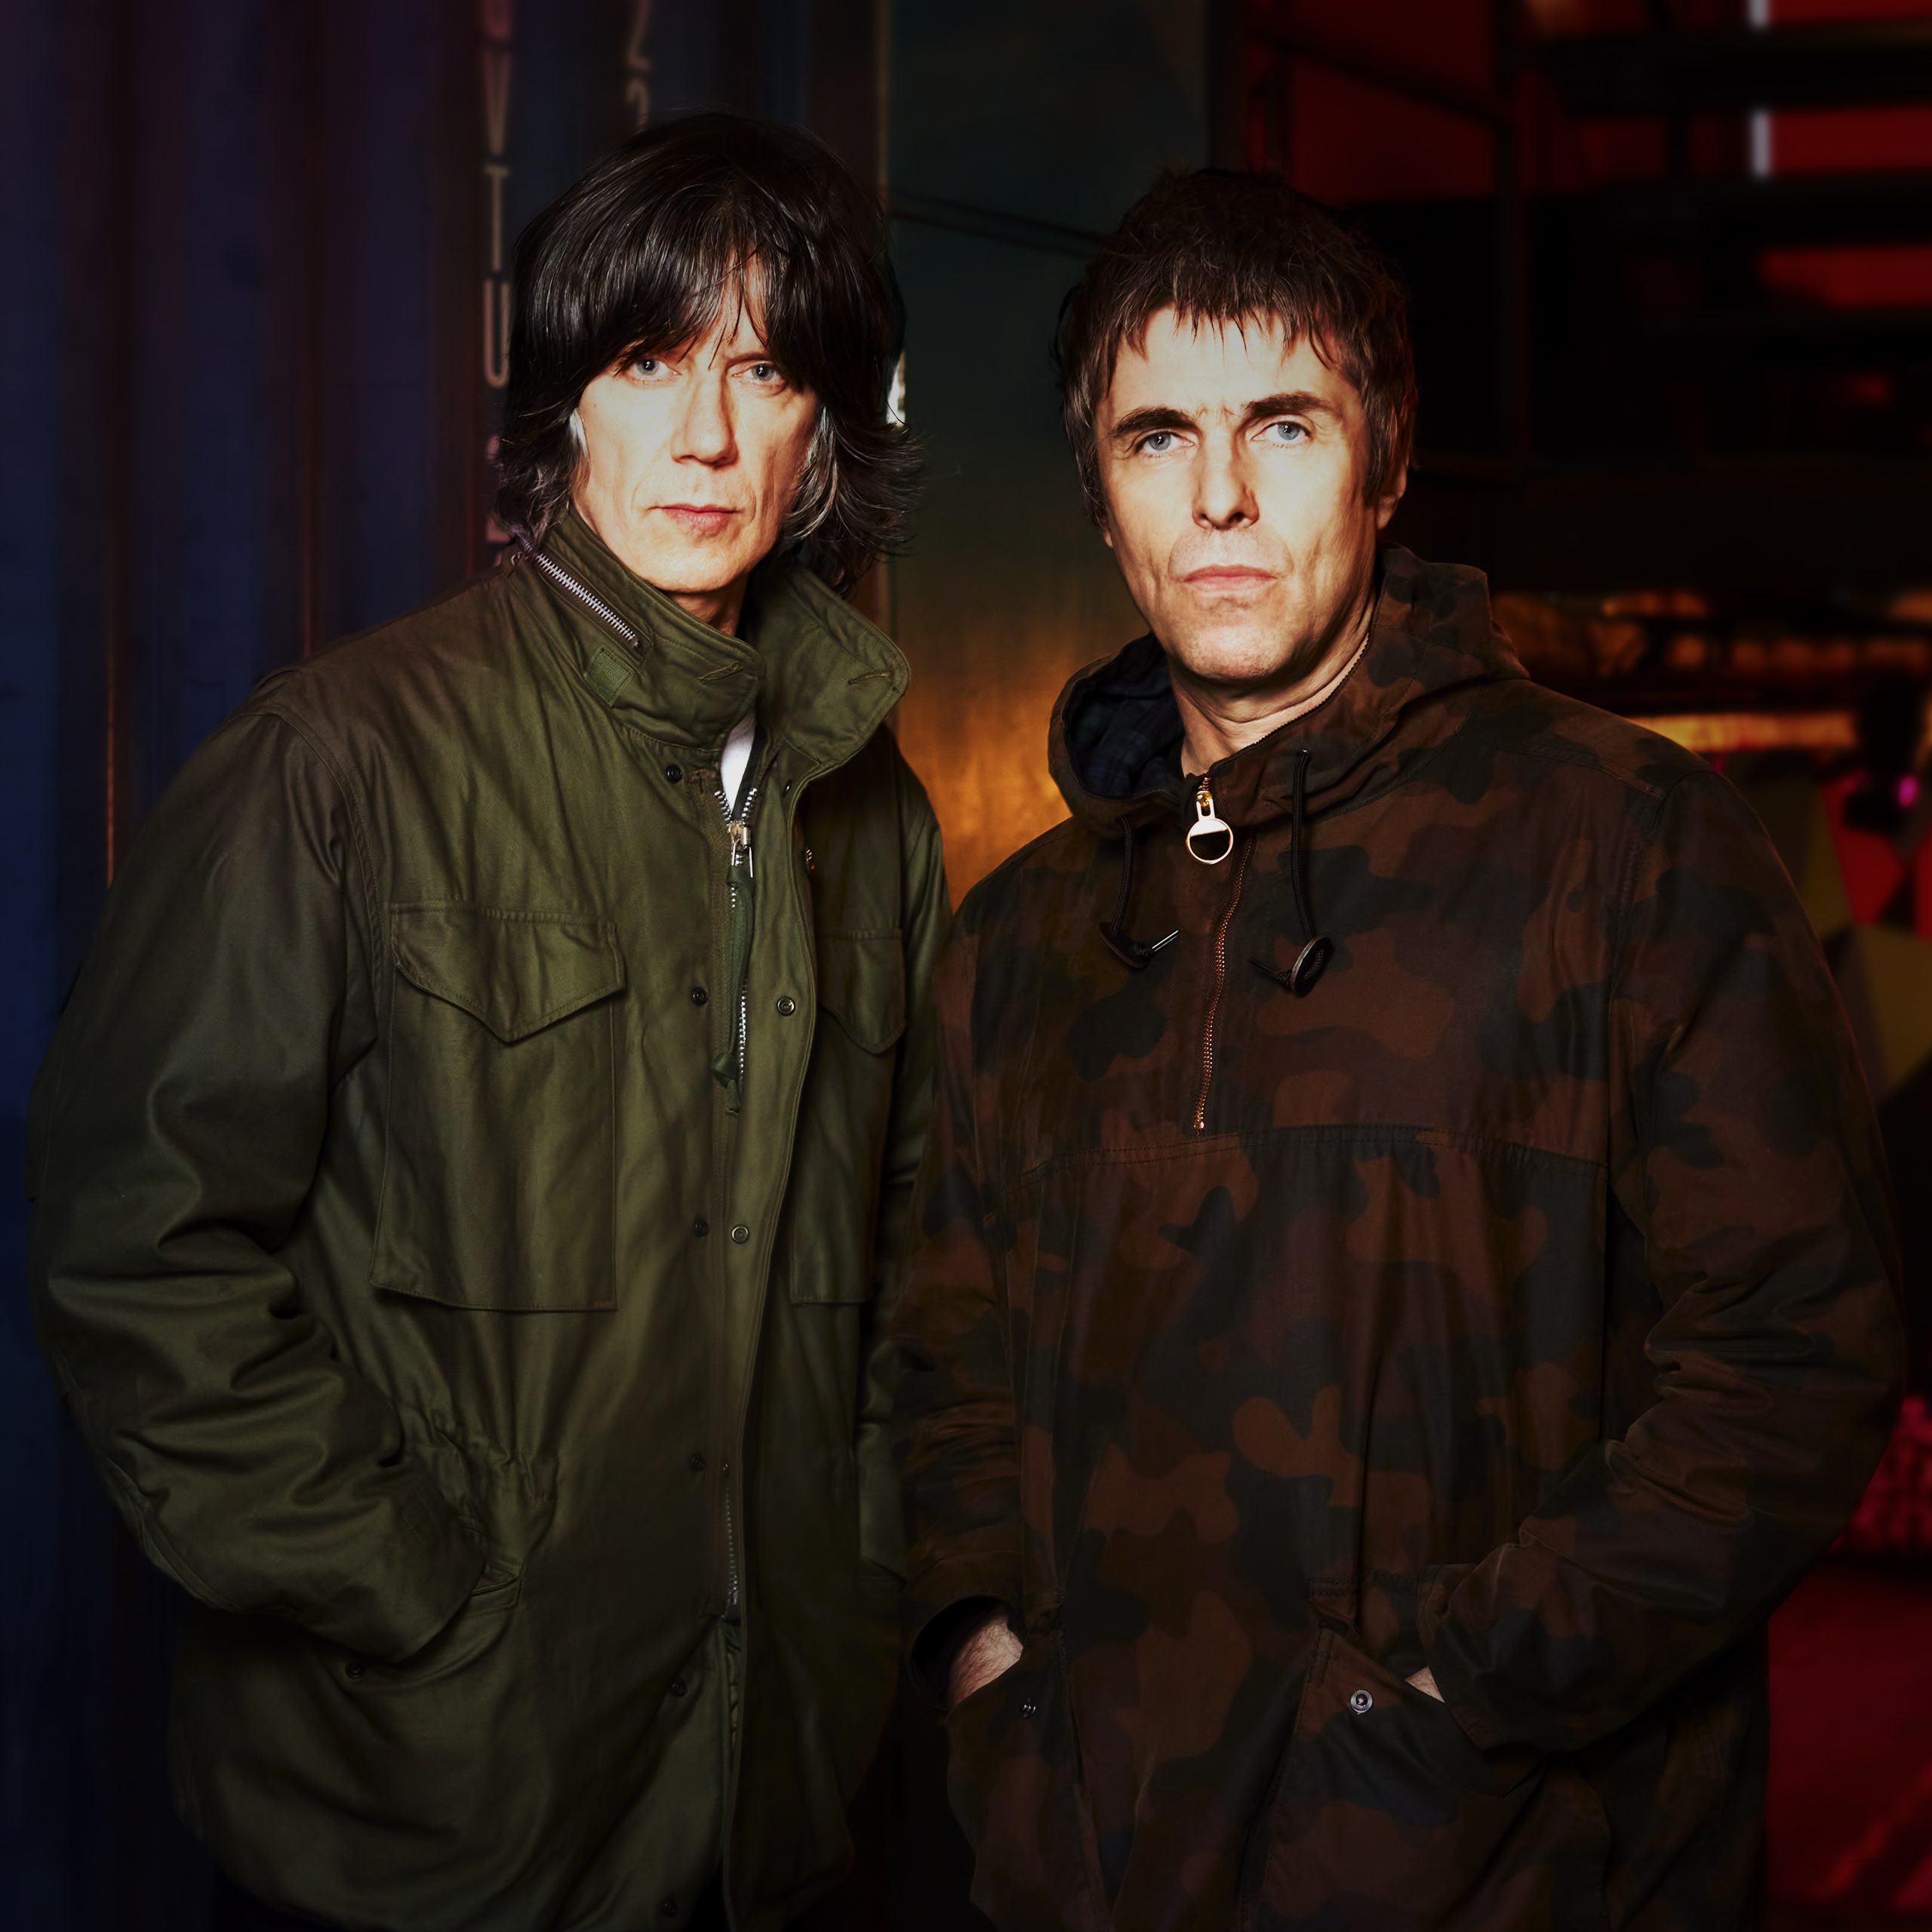 LIAM GALLAGHER & JOHN SQUIRE  THE OASIS AND STONE ROSES LEGENDS ANNOUNCE A NEW COLLABORATION